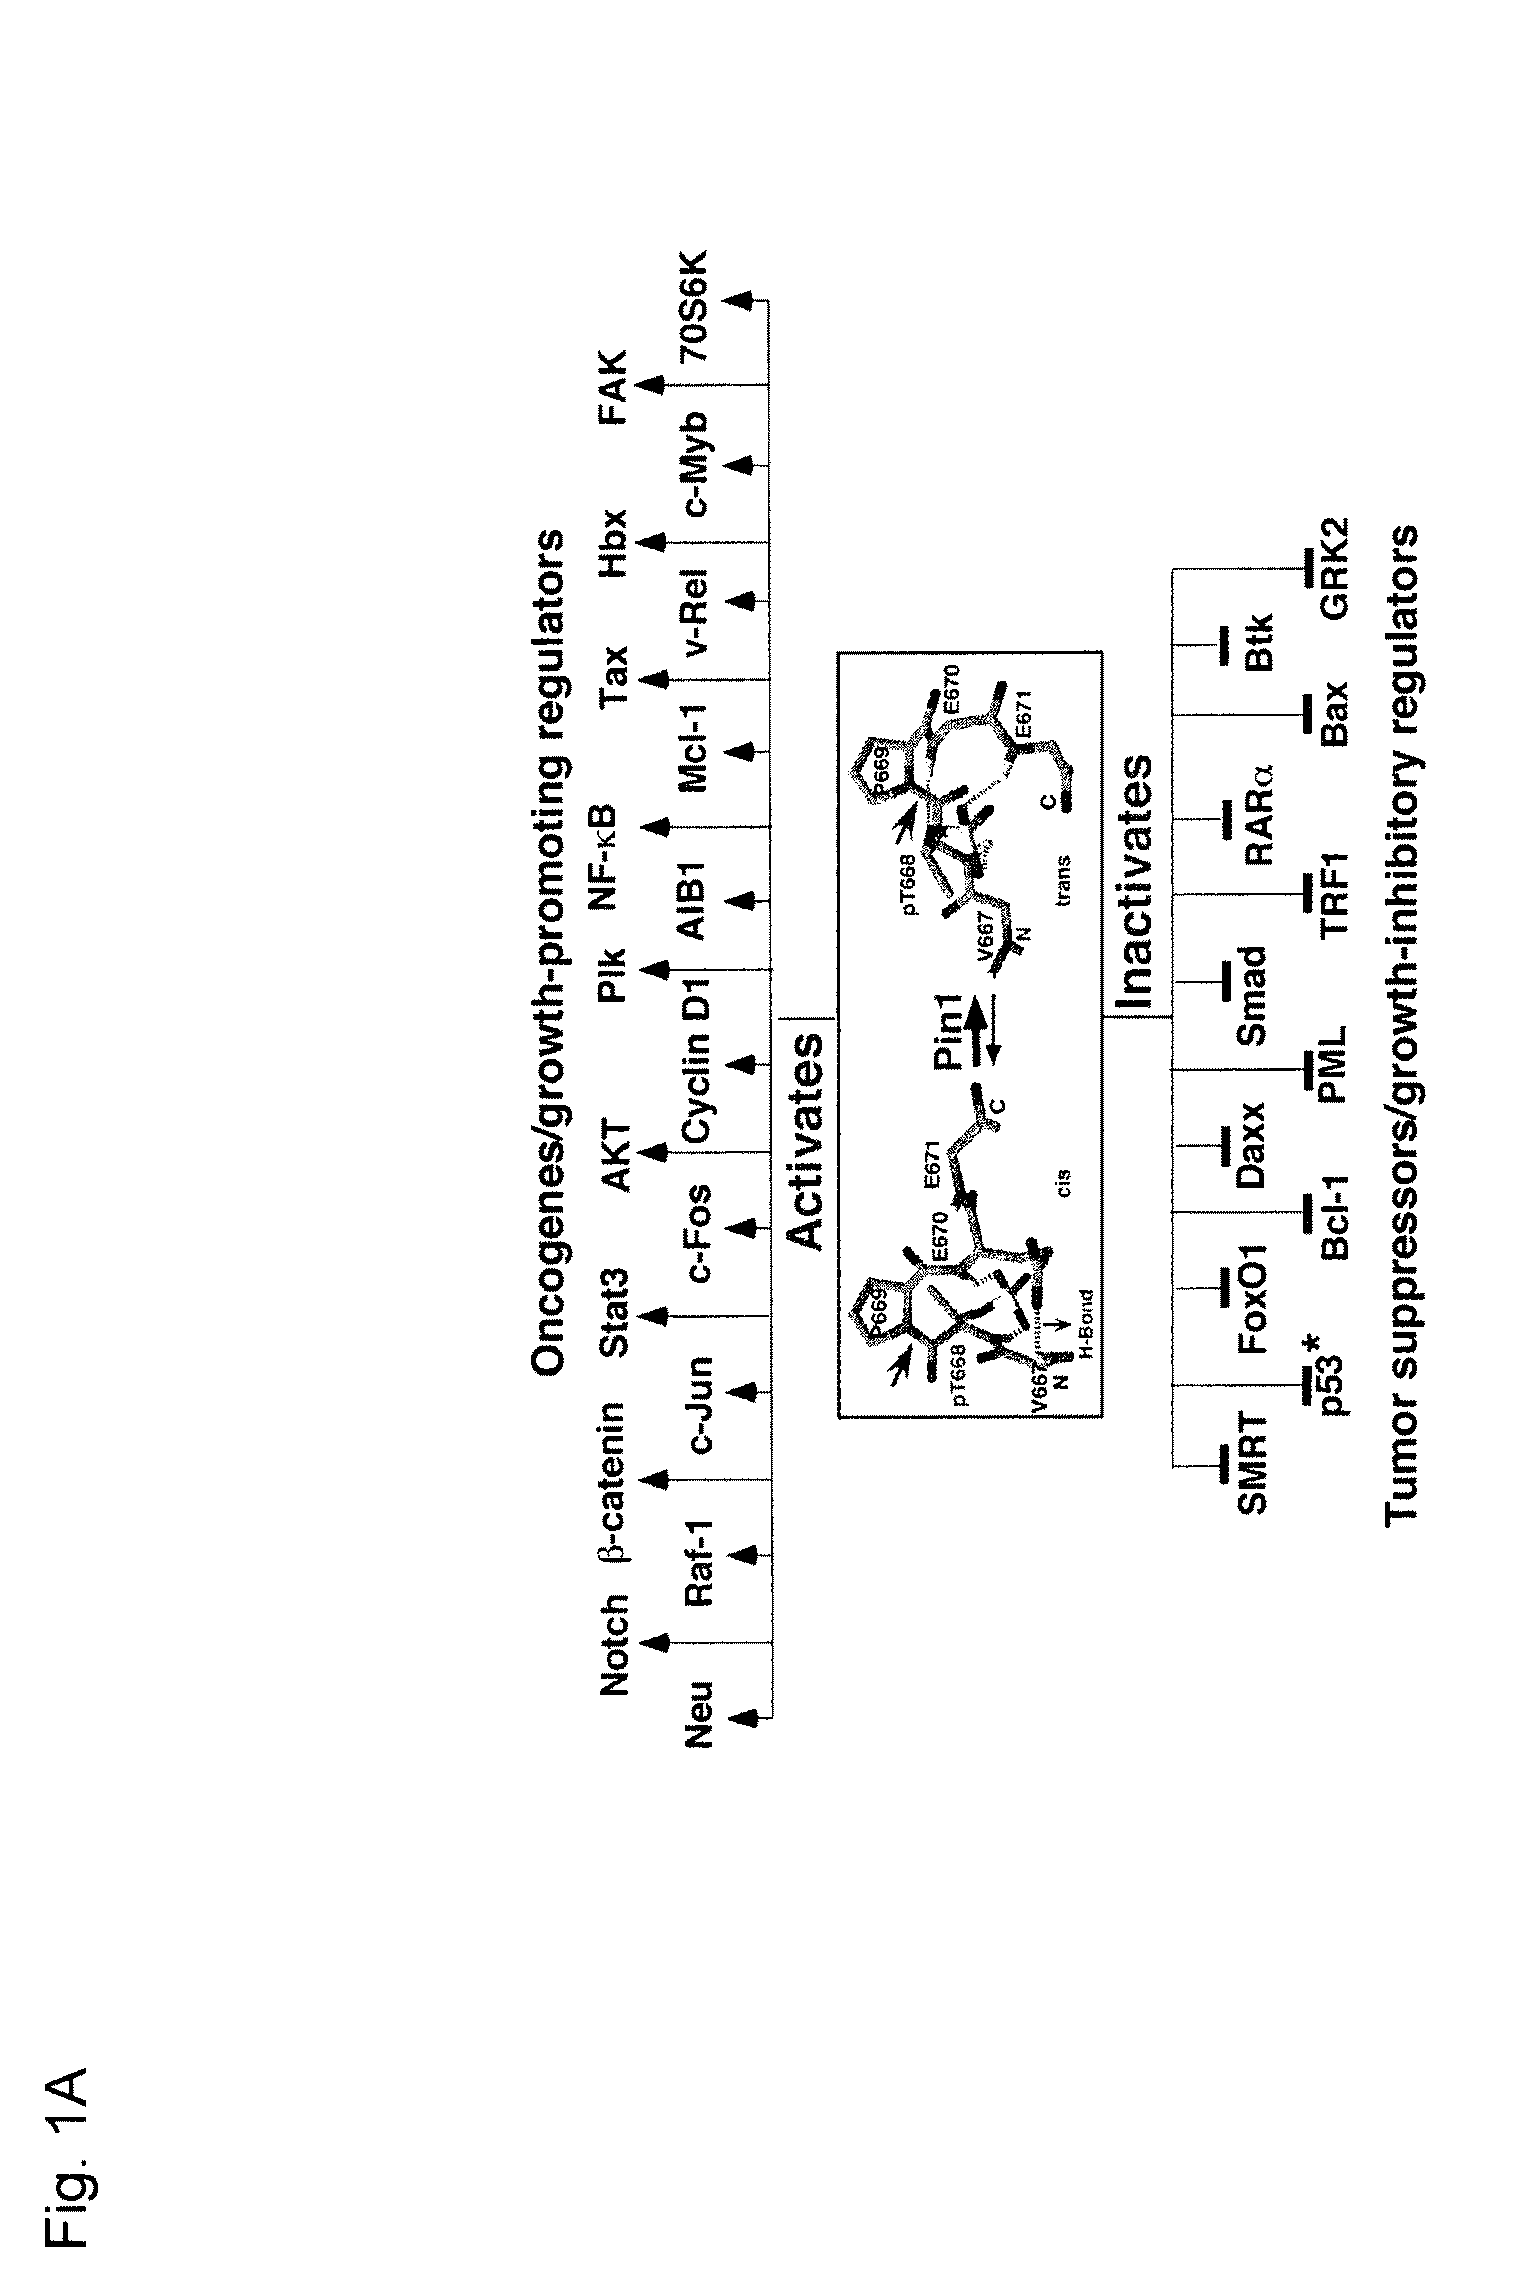 Methods and compositions for the treatment of proliferative disorders